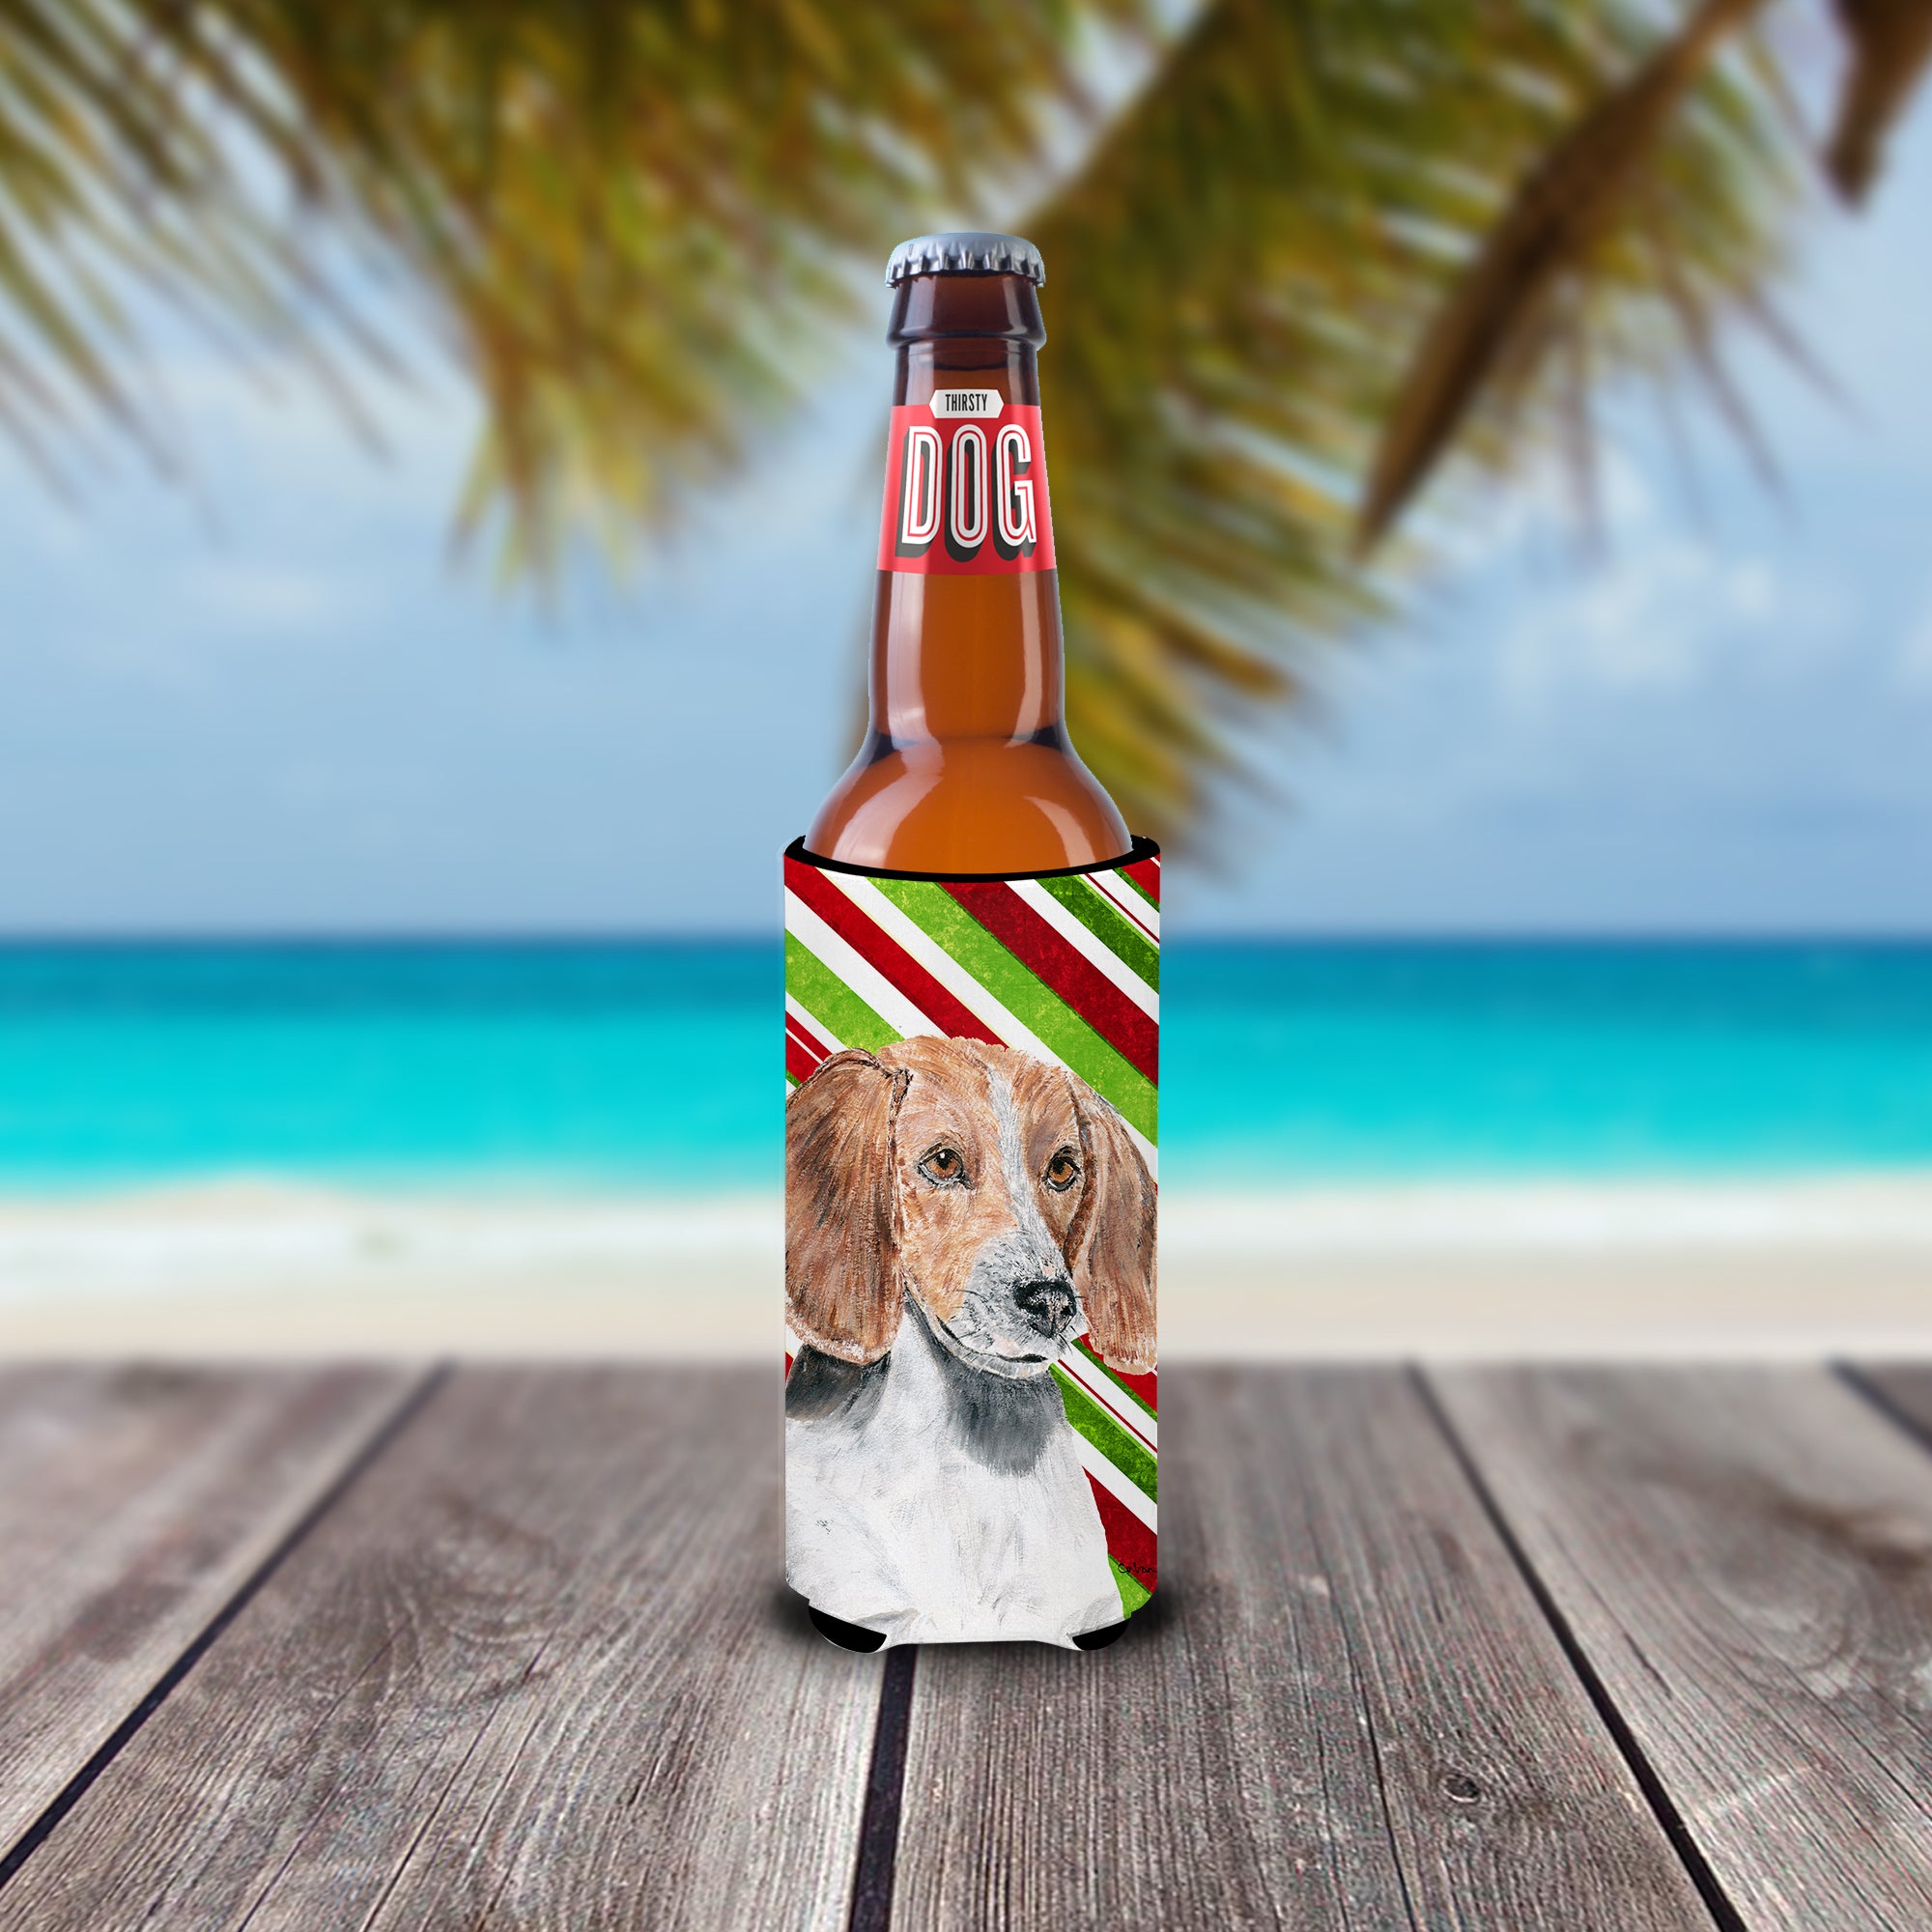 English Foxhound Candy Cane Christmas Ultra Beverage Insulators for slim cans